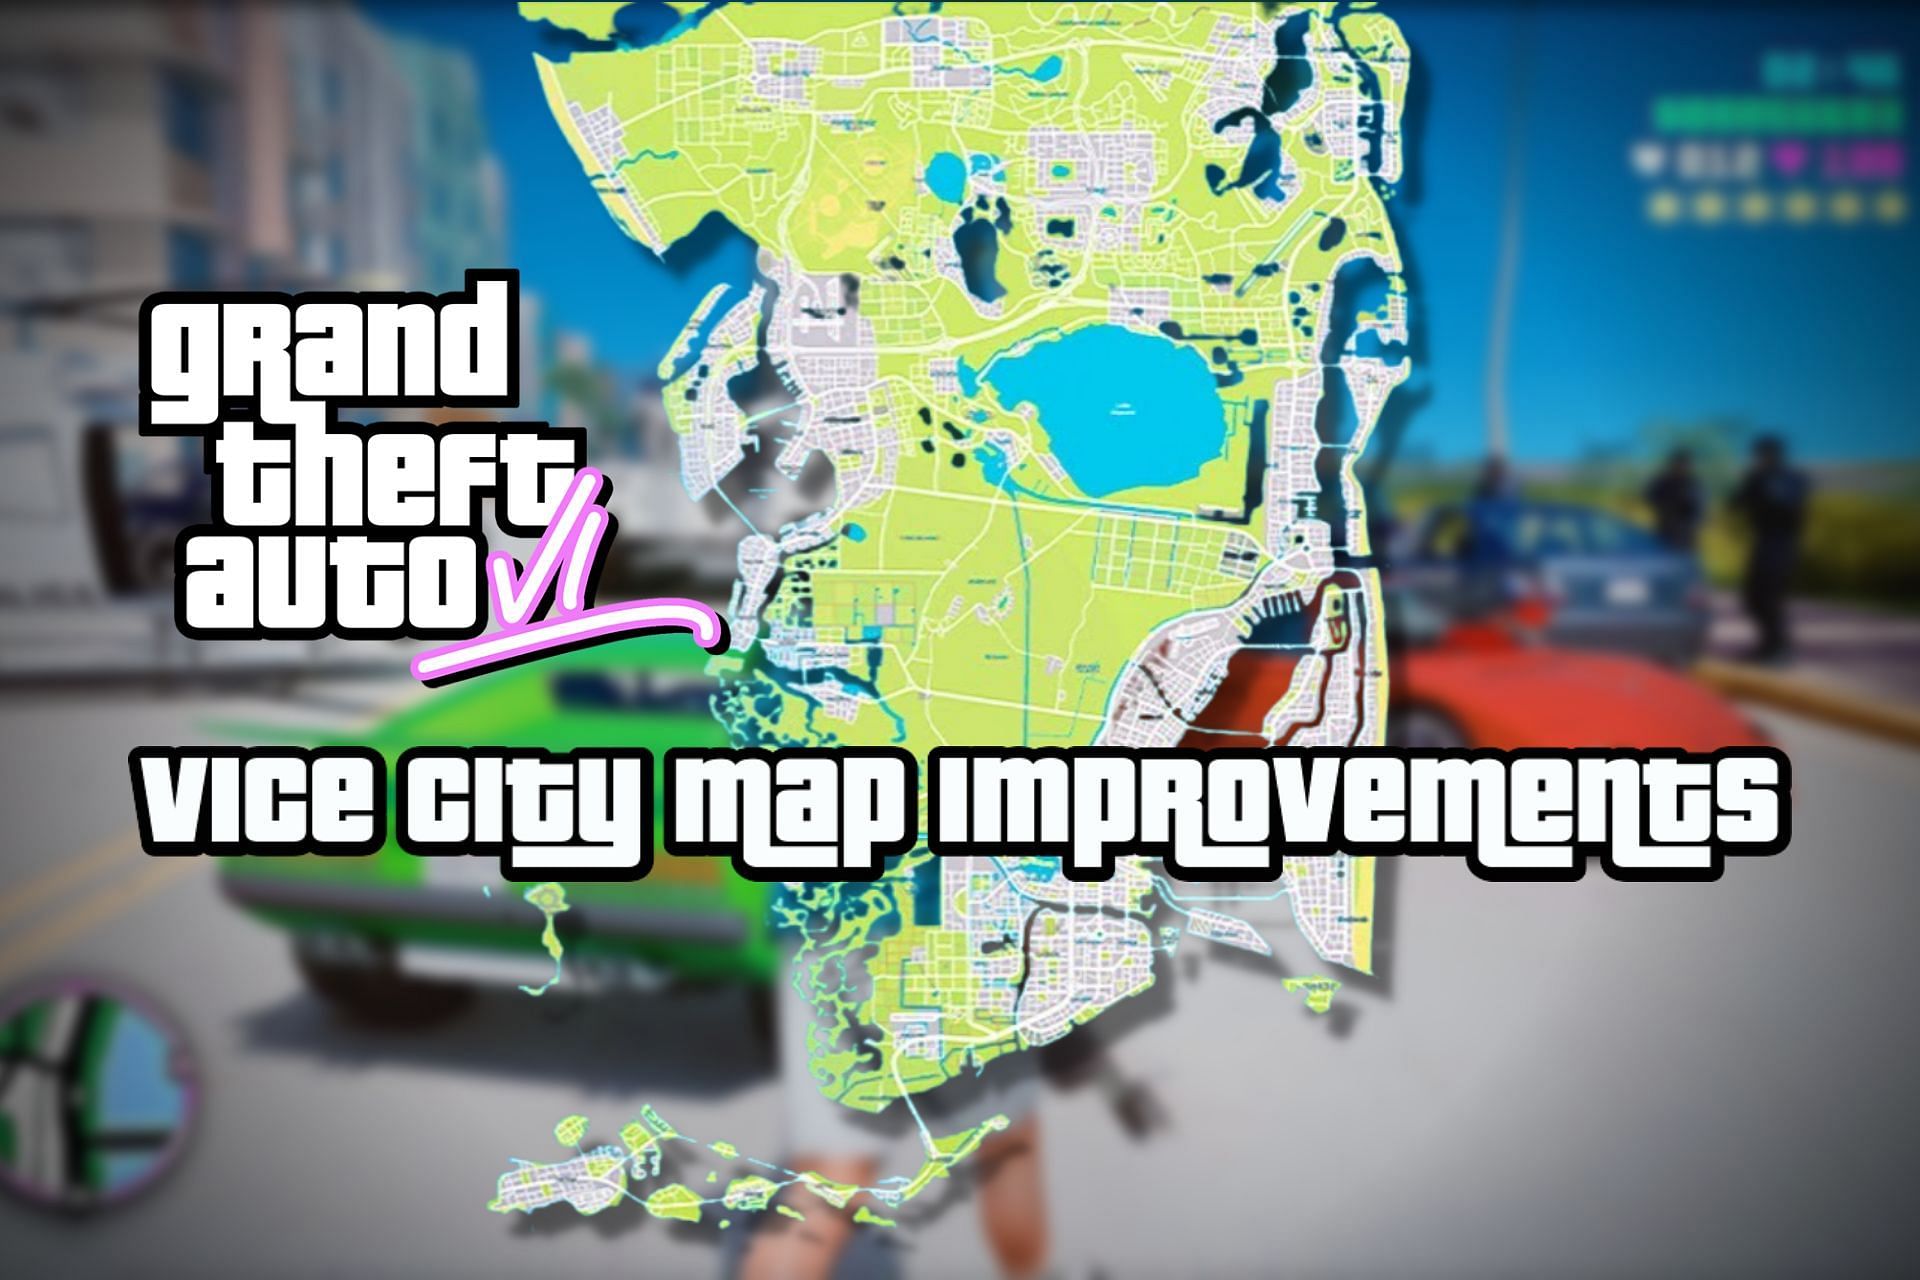 5 ways in which GTA 6 can improve the Vice City map